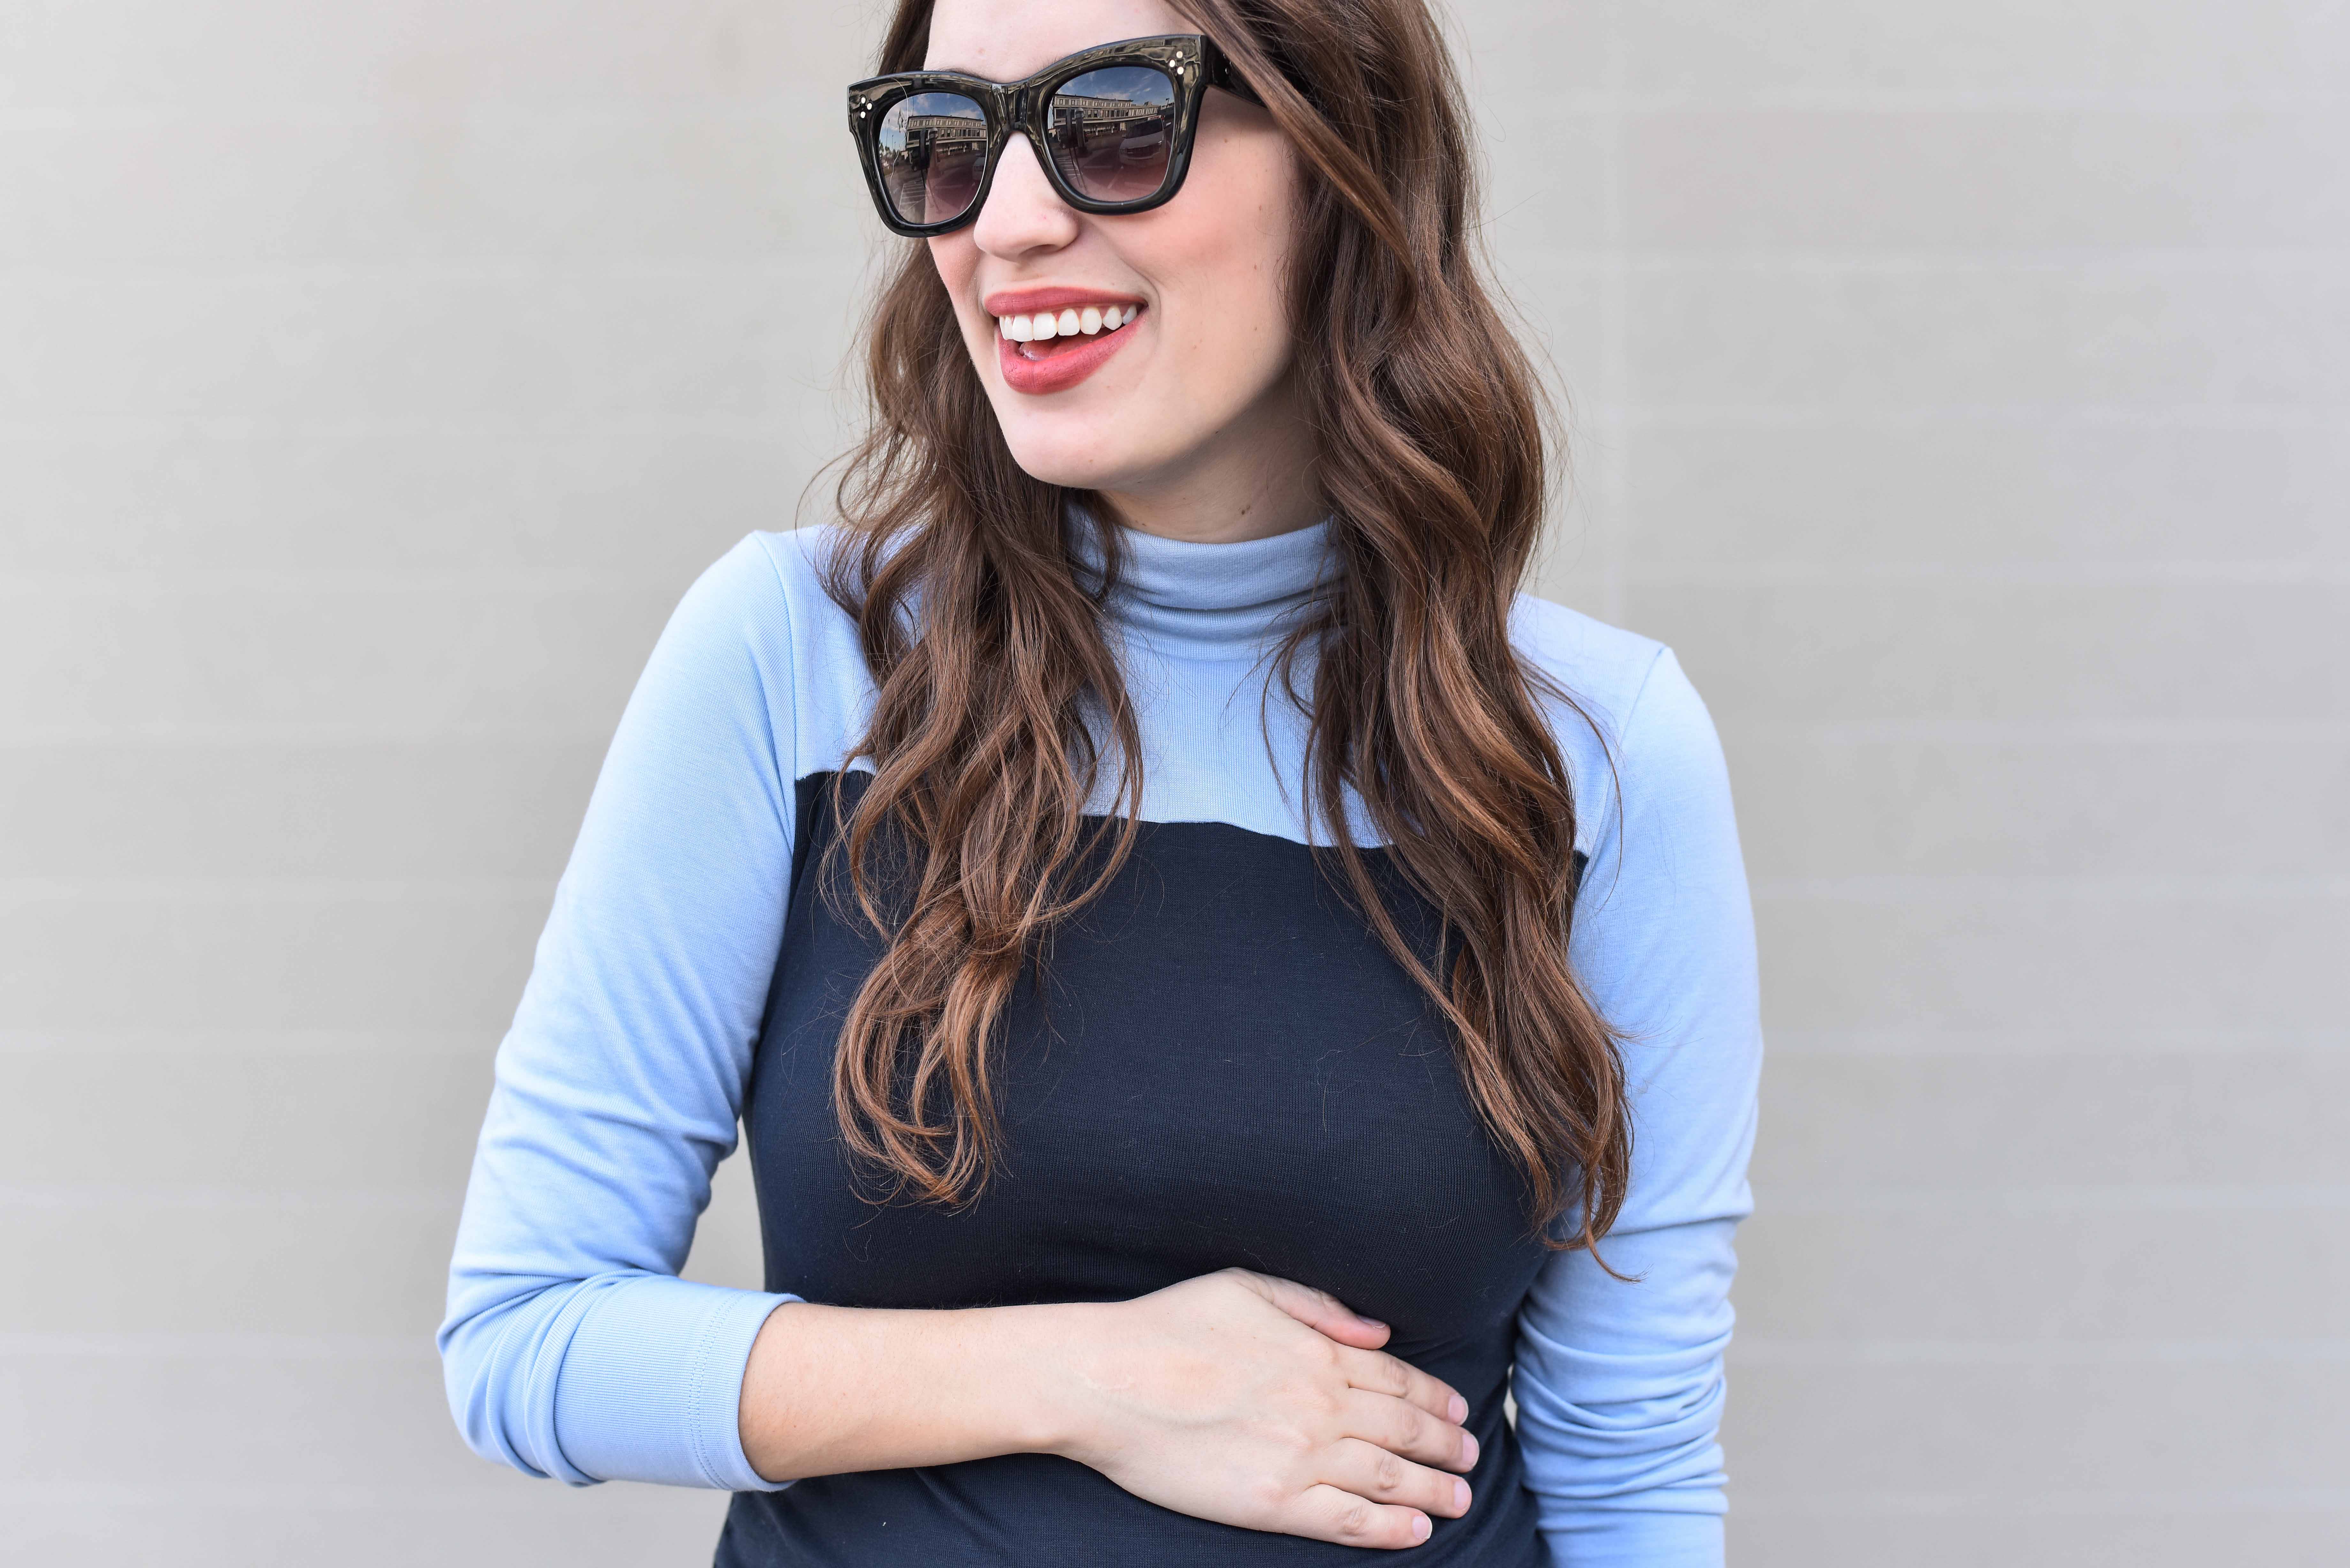 Lone Star Looking Glass, a Texas fashion blow, styles a blue colorblocked maternity dress from Stowaway at 28 weeks pregnant.